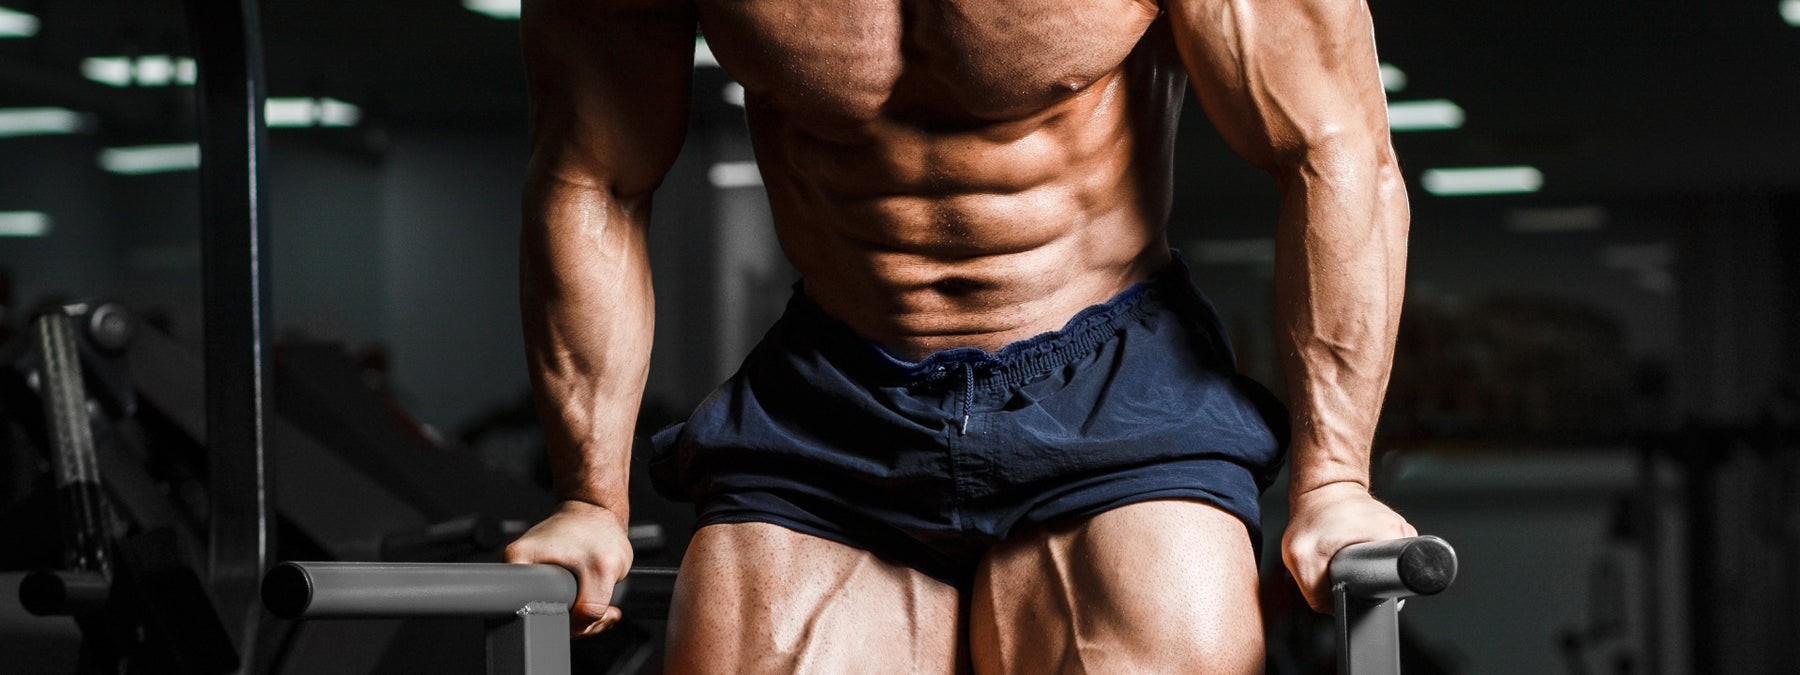 Shredded Abs Year-Round: Is the Cost Worth It?